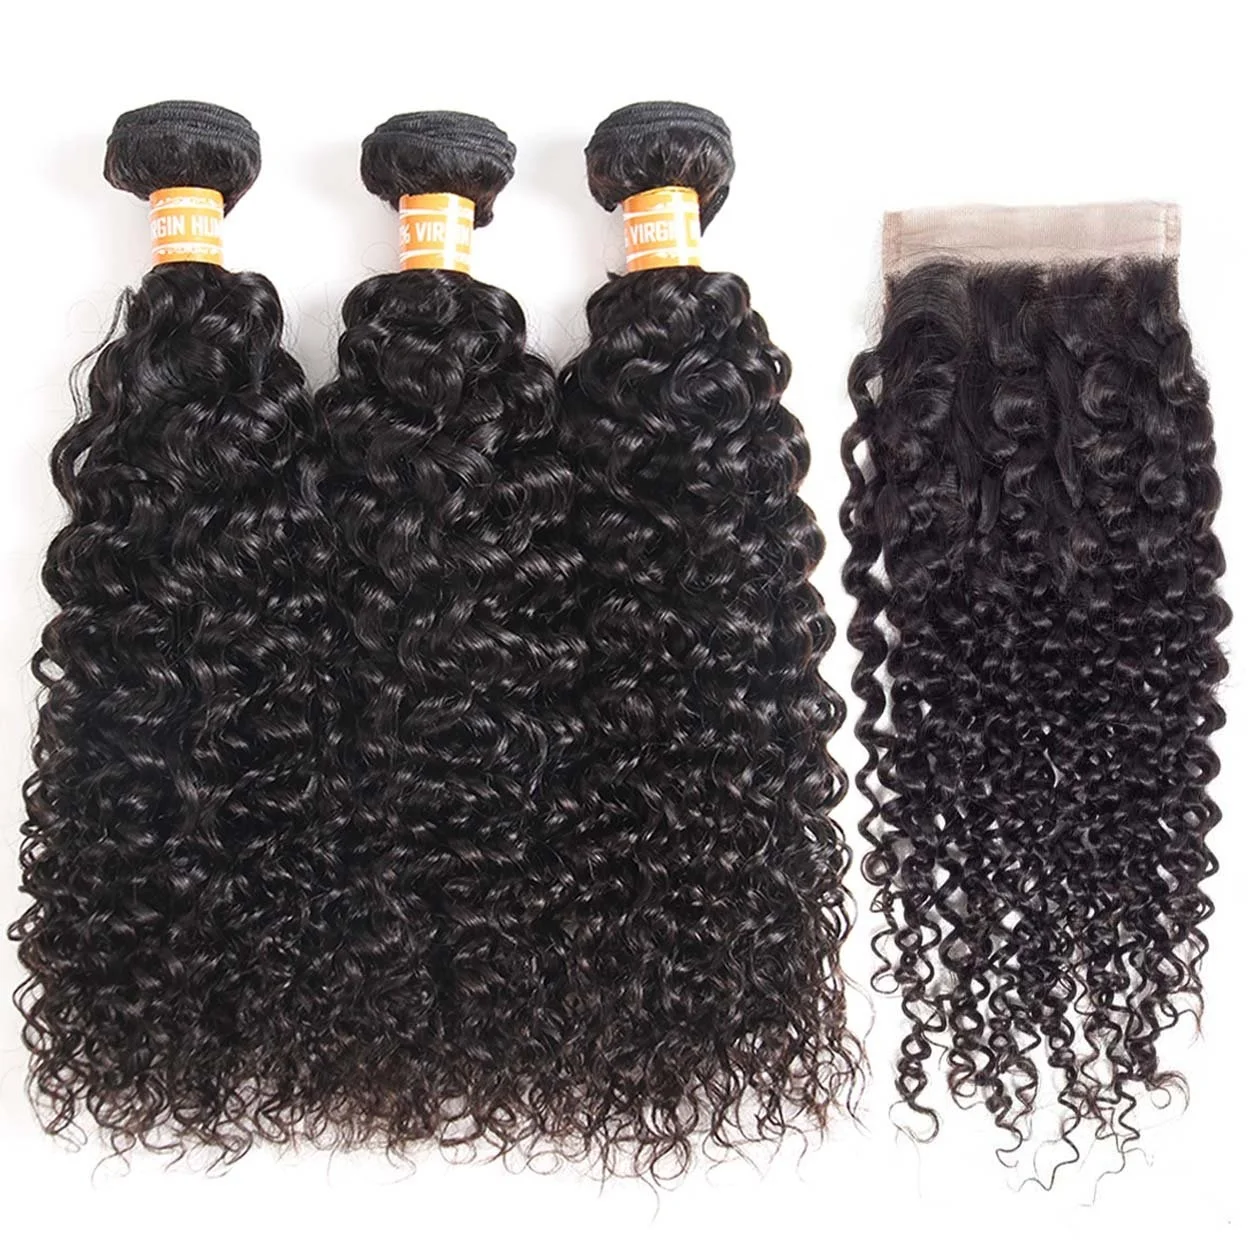 

Mongolian afro kinky curly bundles with closure,1B natural color human hair weave,10a remy Hair extensions